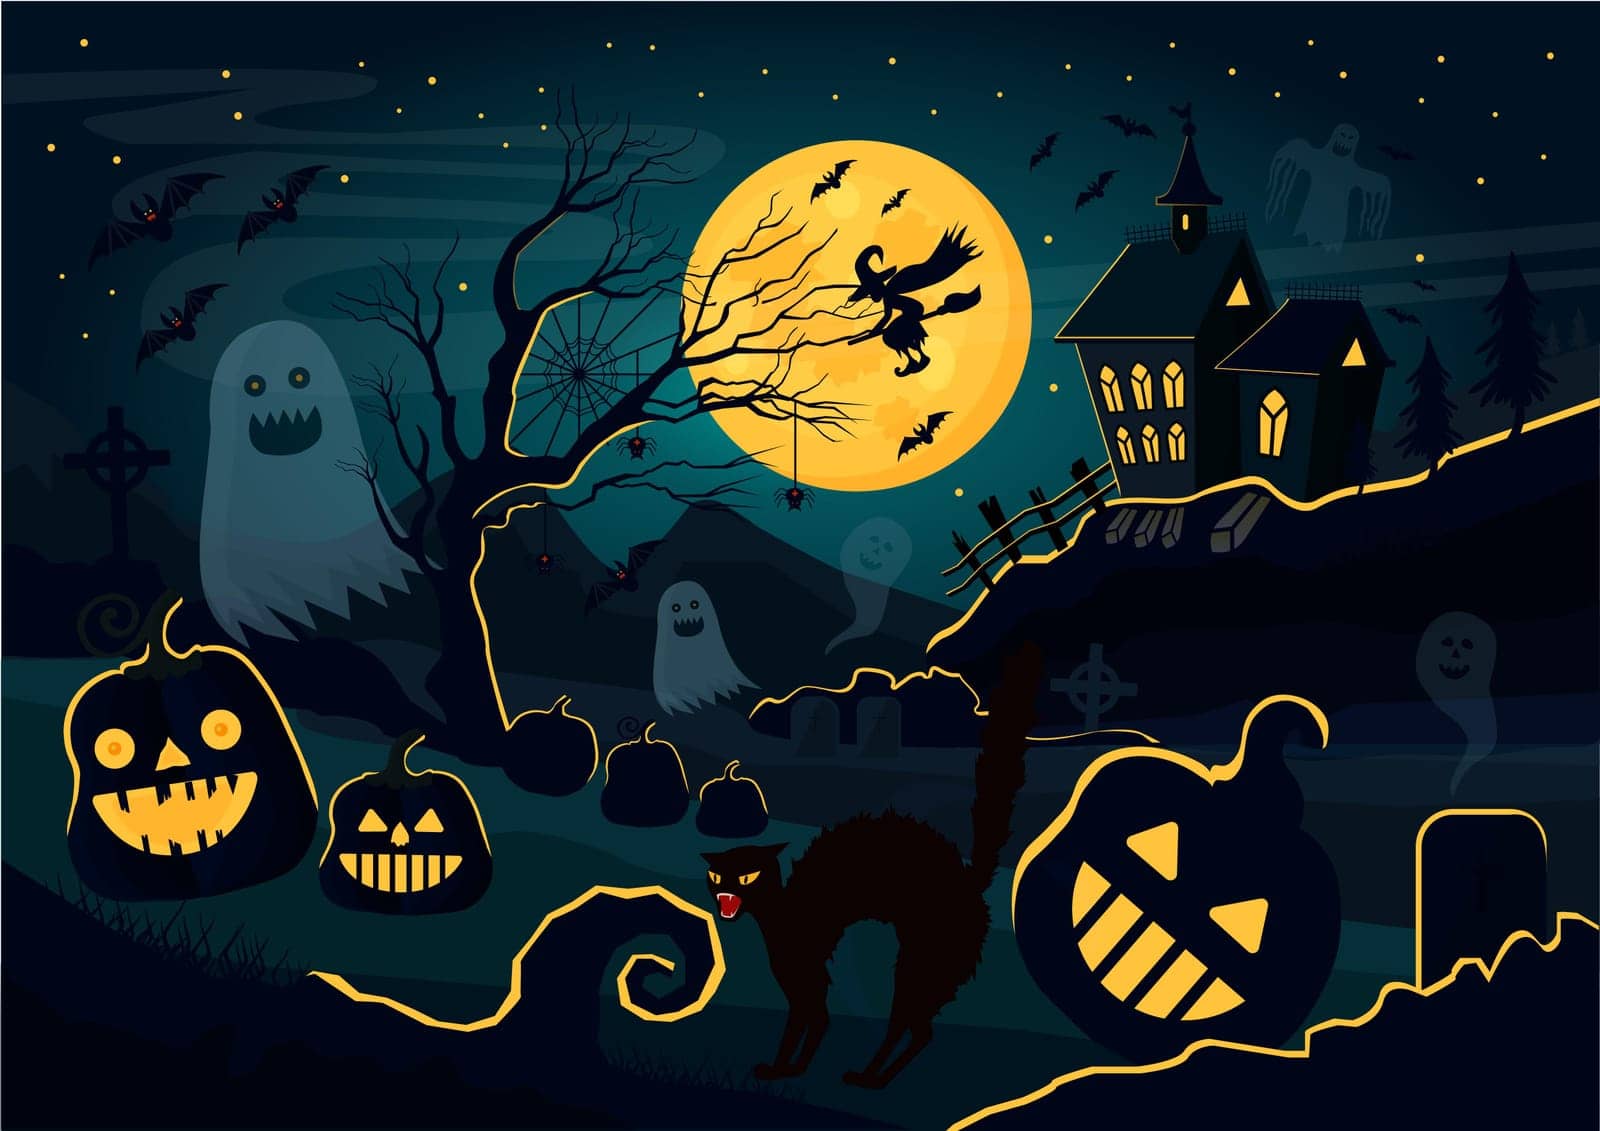 Vector illustration of silhouettes of ghosts, pumpkins, witch, scary cat and other different creatures and decorations for Halloween